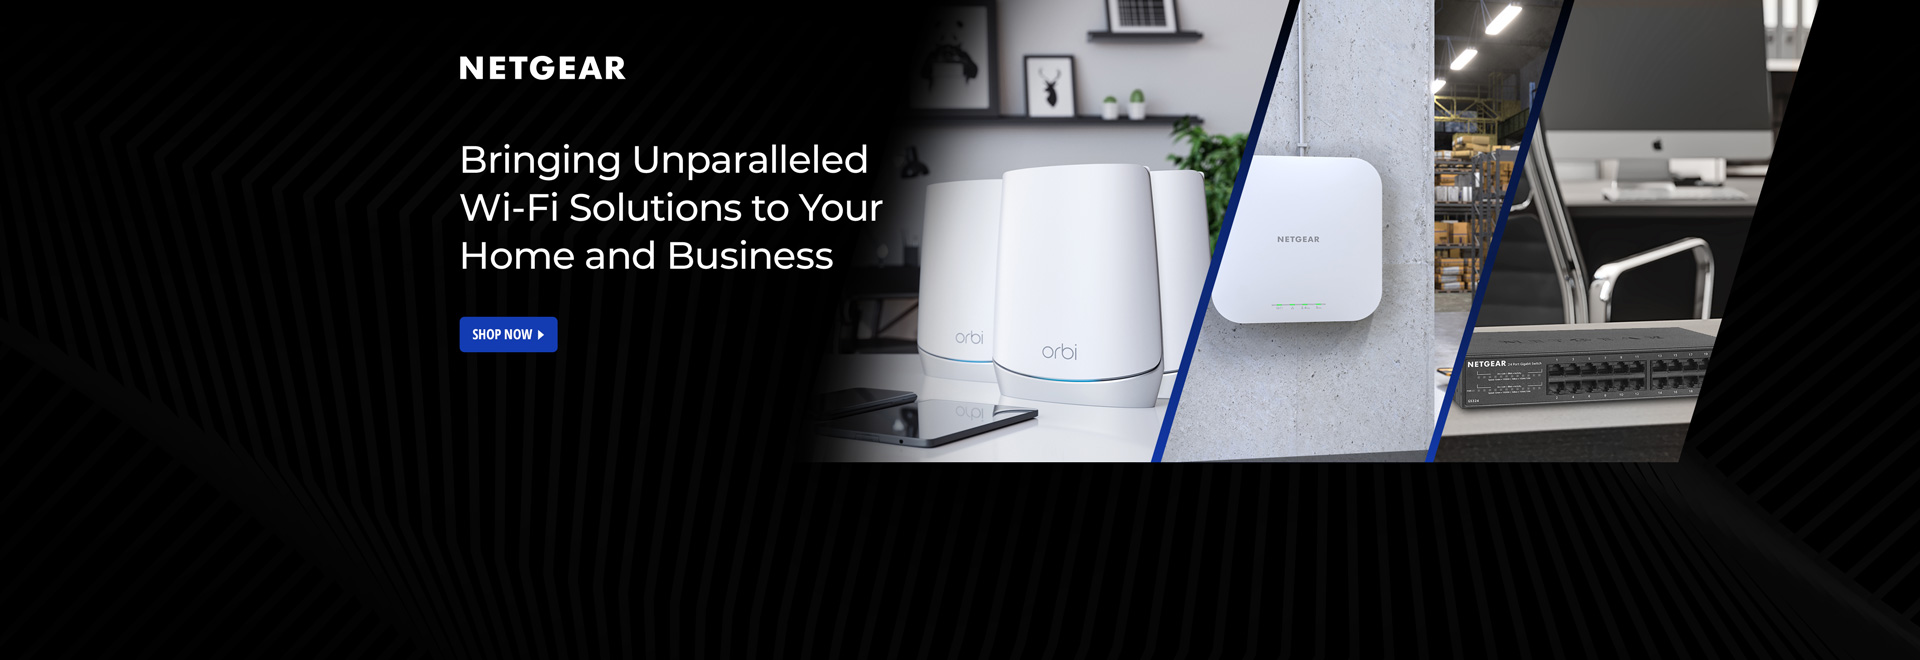 Netgear Bringing Unparalleled Wi-Fi Solution to Your Home and Business